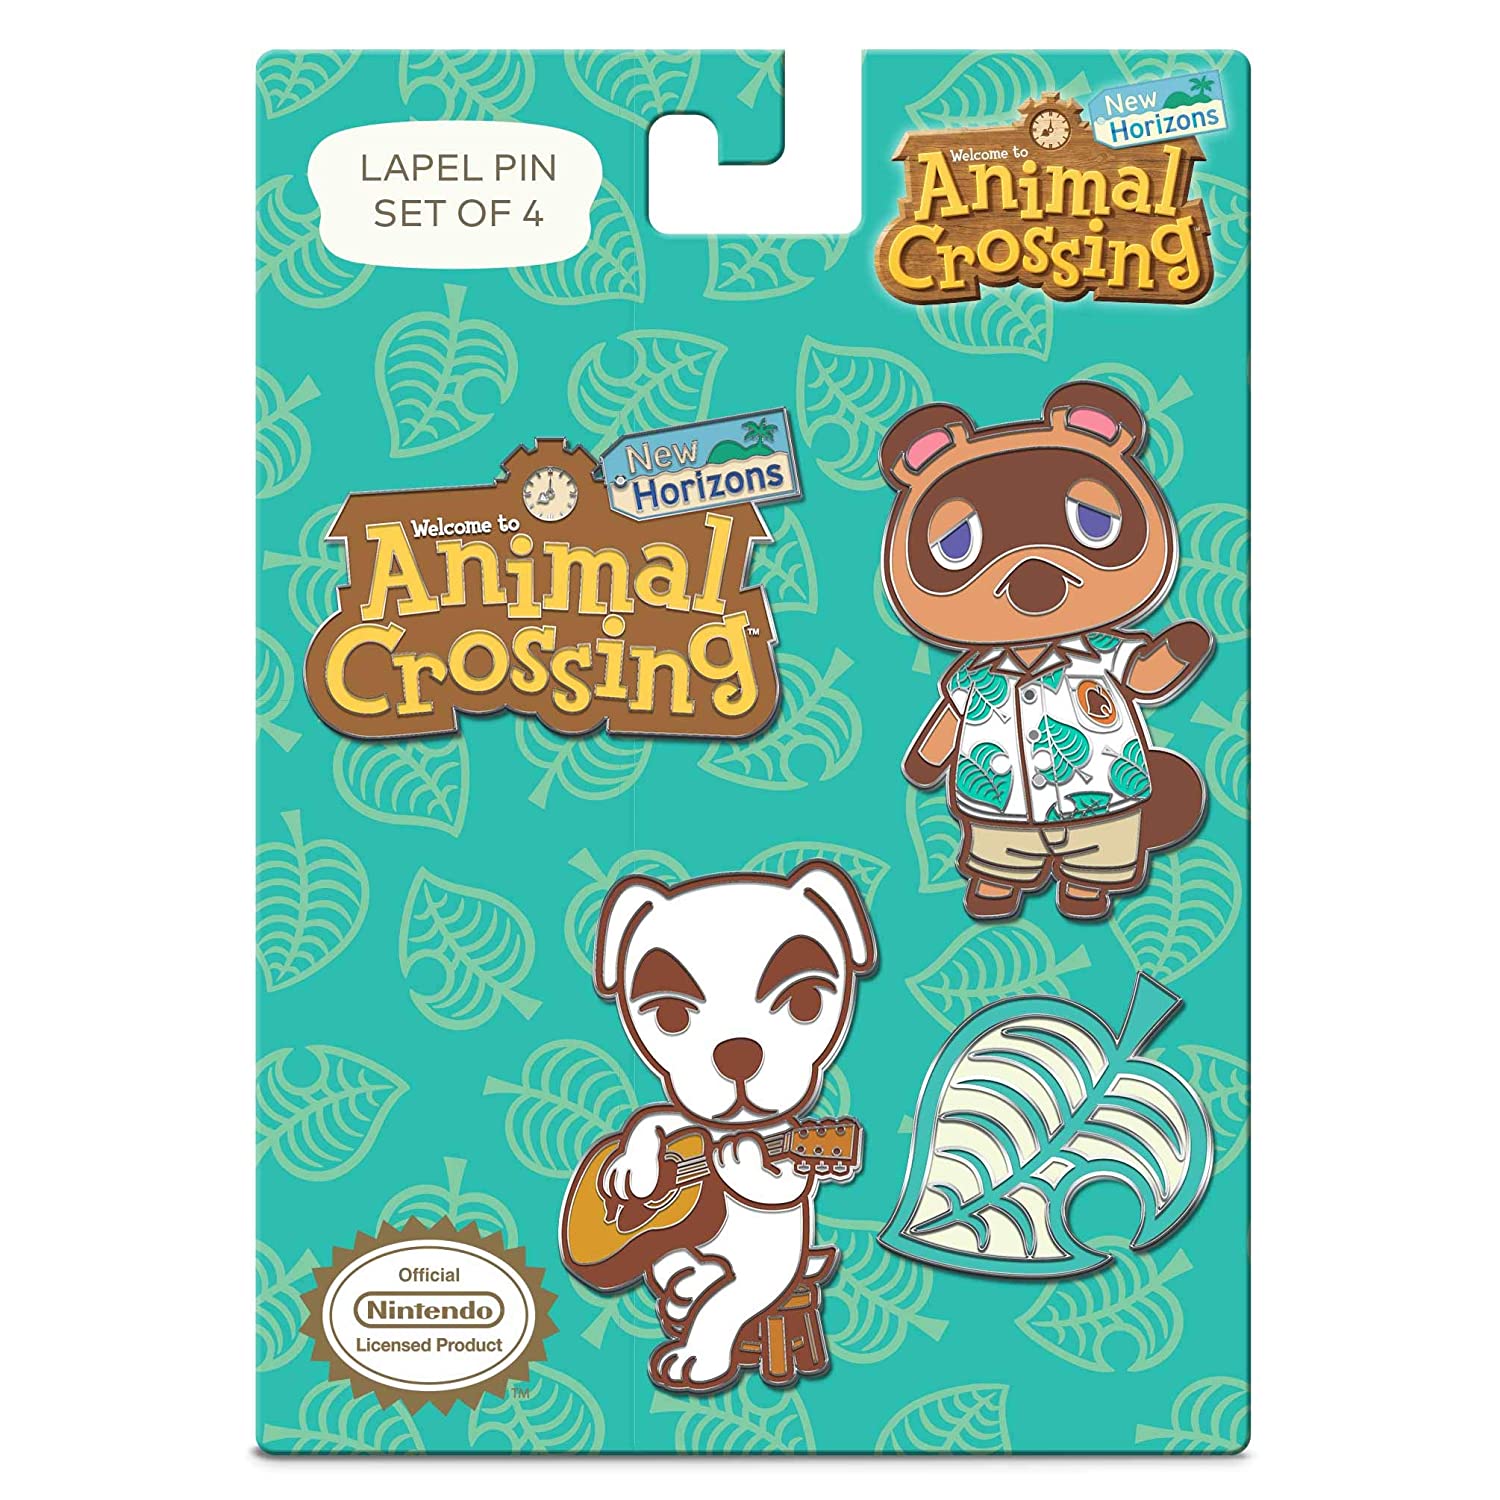 More Animal Crossing: New Horizons merch is popping up ...